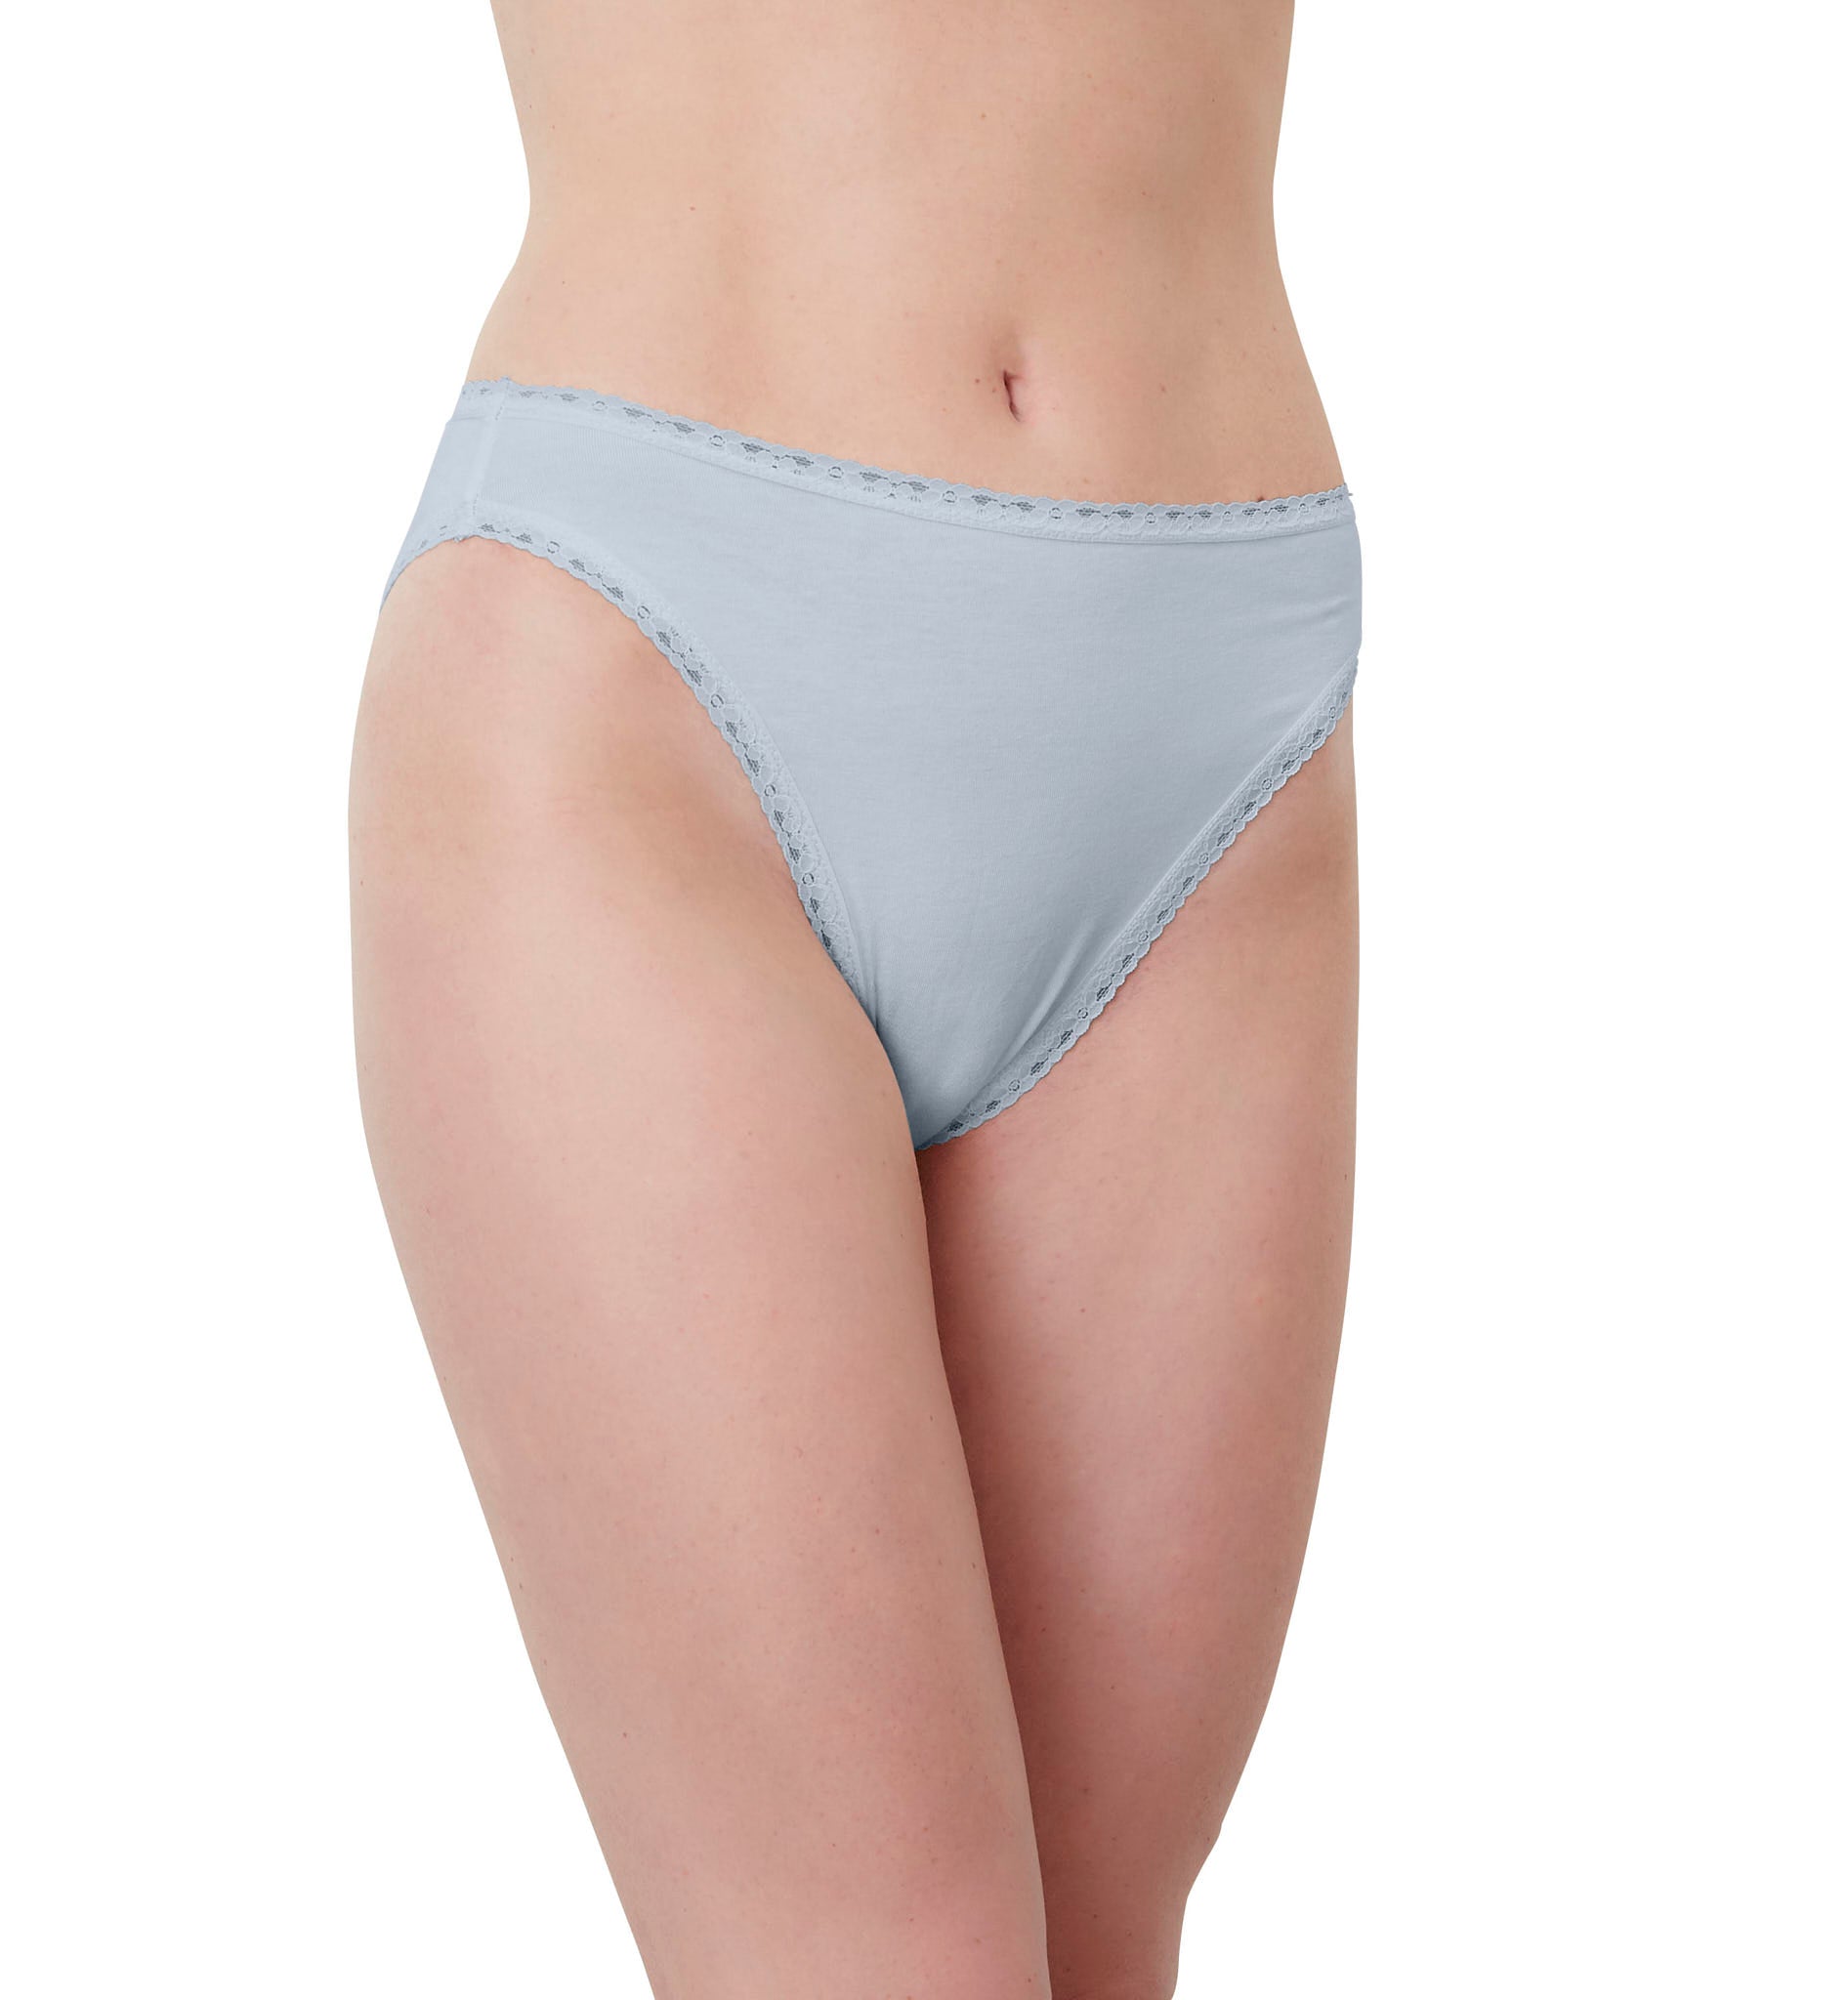 Organic Cotton Underwear - Made With All Natural Fibers!